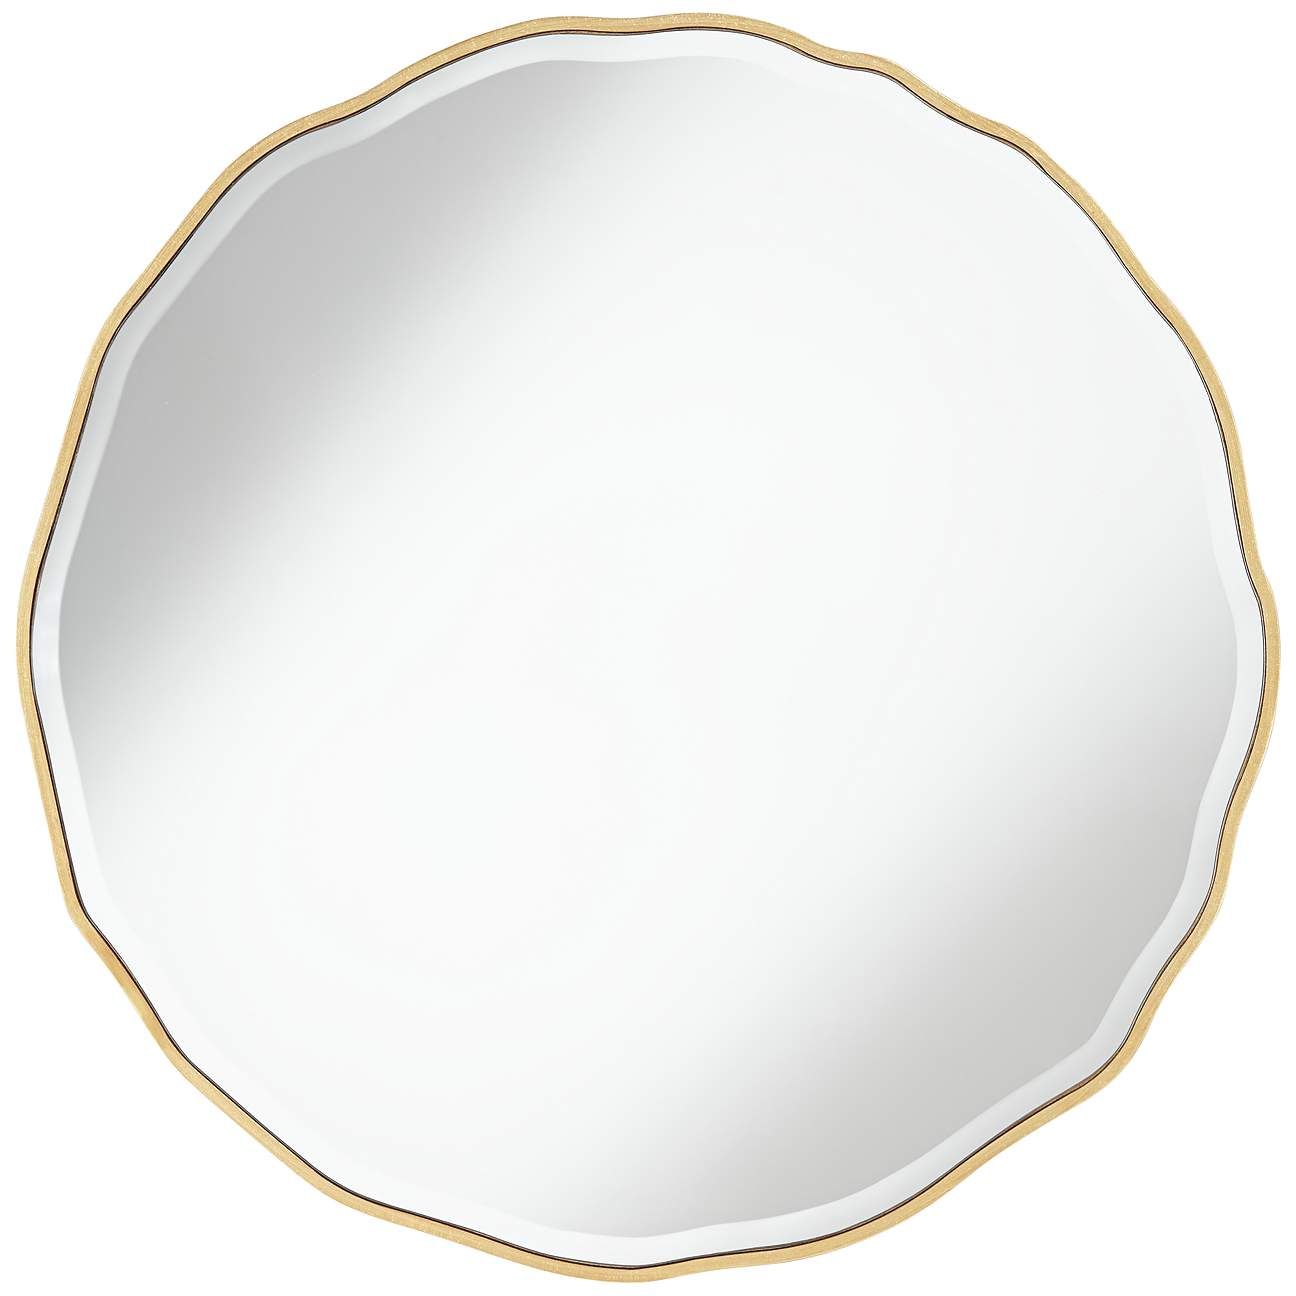 Lissa Gold Waved Edge 31 1/2" x 31 1/2" Wall Mirror - #24K71 | Lamps Plus | Lamps Plus